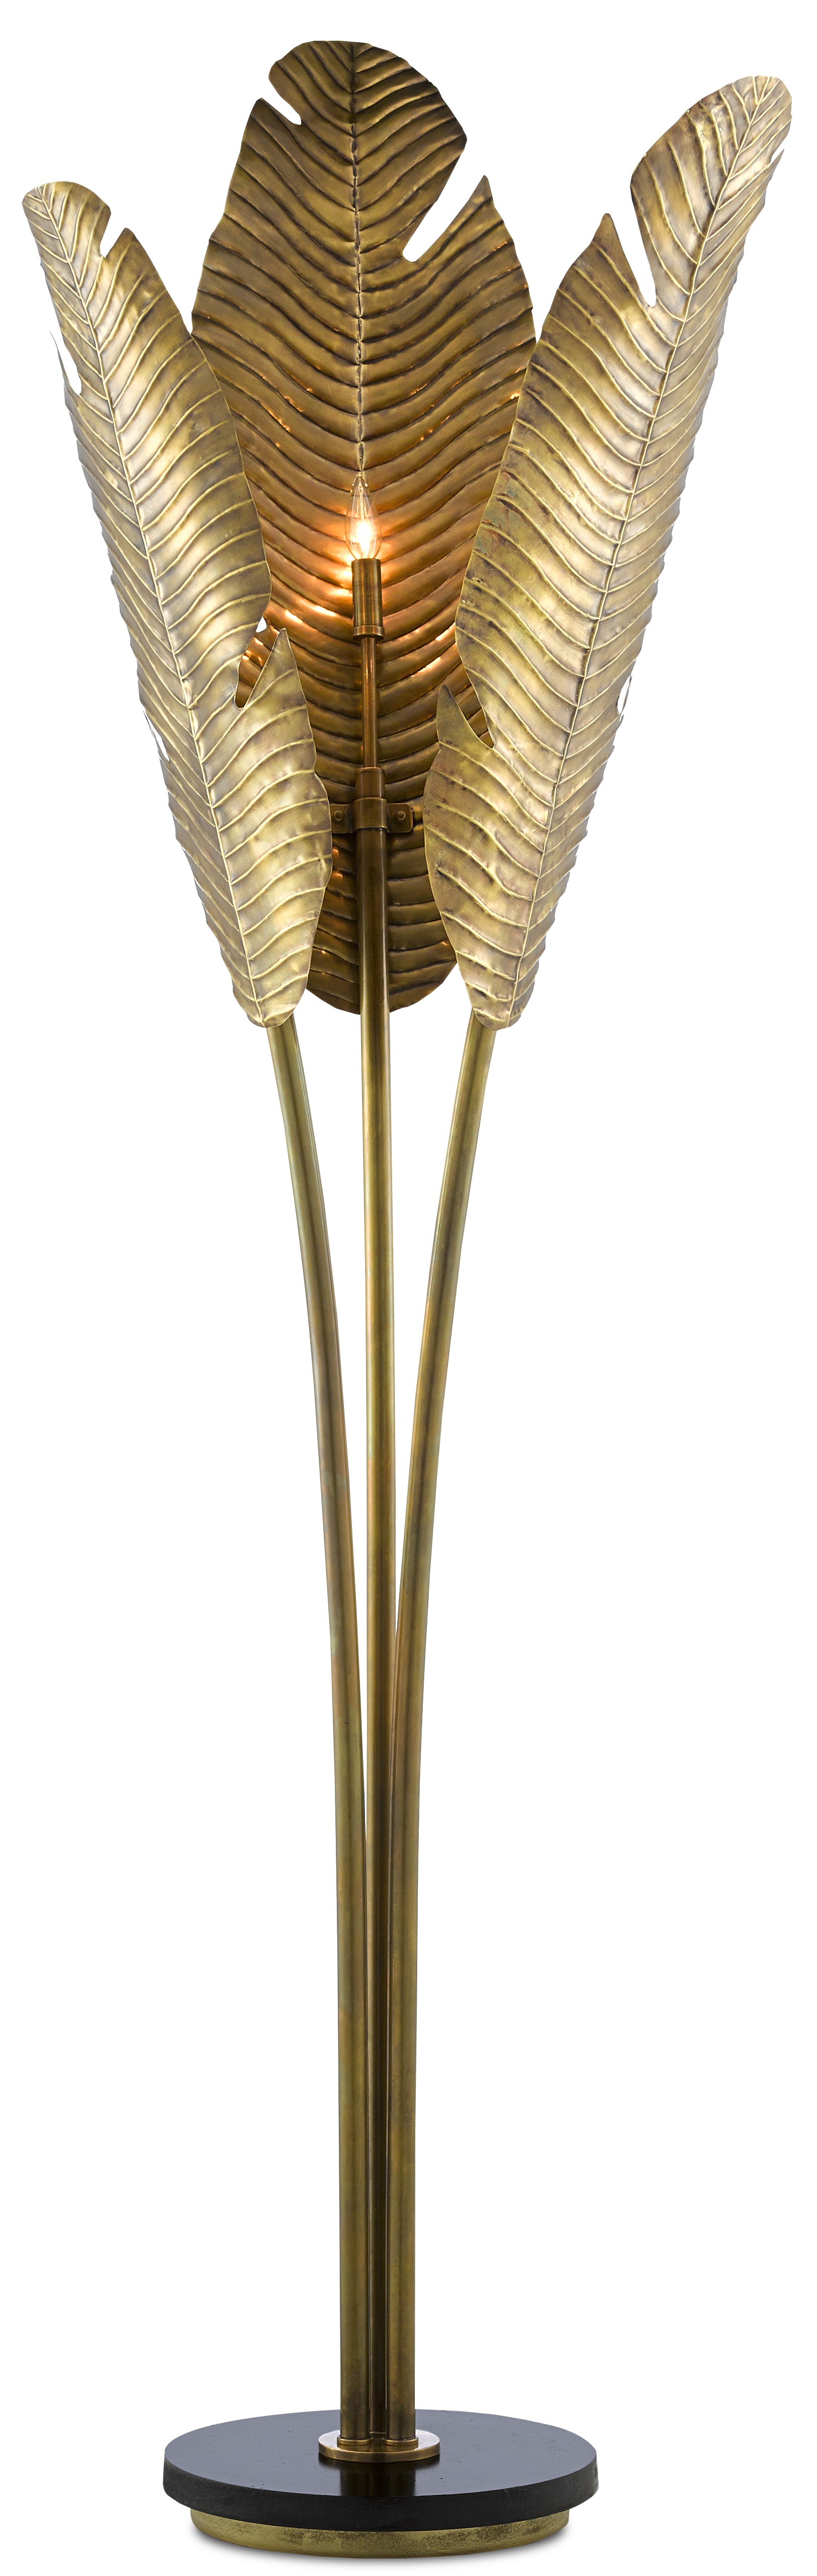 Tropical floor lamp currey and company